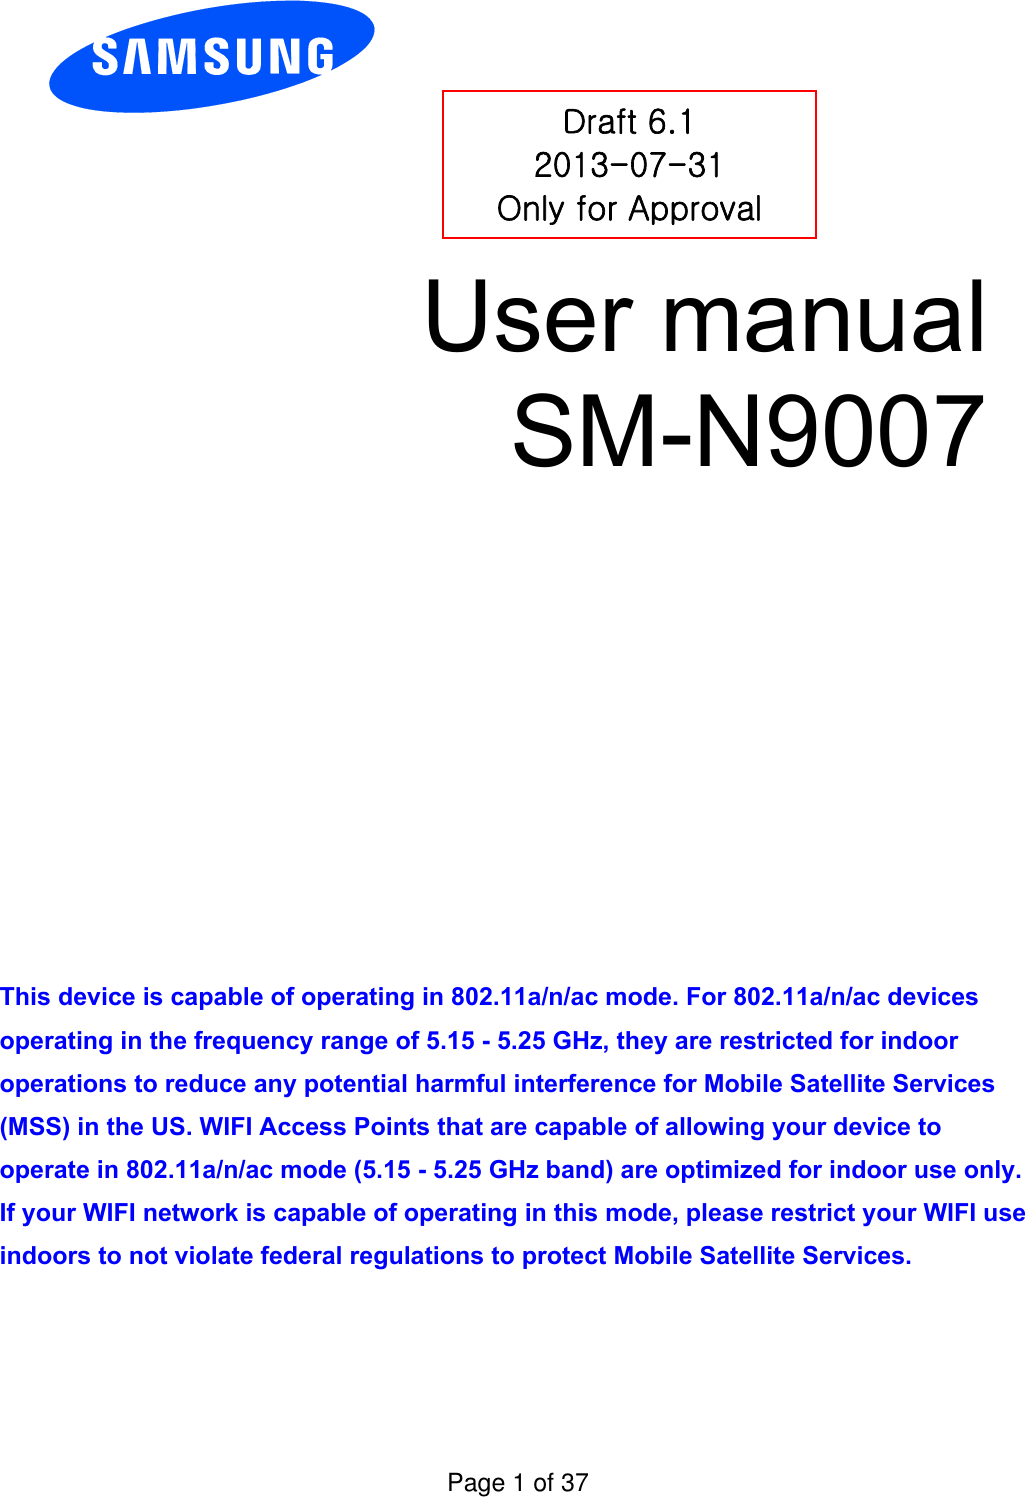 User manual SM-N9007 This device is capable of operating in 802.11a/n/ac mode. For 802.11a/n/ac devices operating in the frequency range of 5.15 - 5.25 GHz, they are restricted for indoor operations to reduce any potential harmful interference for Mobile Satellite Services (MSS) in the US. WIFI Access Points that are capable of allowing your device to operate in 802.11a/n/ac mode (5.15 - 5.25 GHz band) are optimized for indoor use only. If your WIFI network is capable of operating in this mode, please restrict your WIFI use indoors to not violate federal regulations to protect Mobile Satellite Services. Draft 6.1 2013-07-31 Only for Approval Page 1 of 37